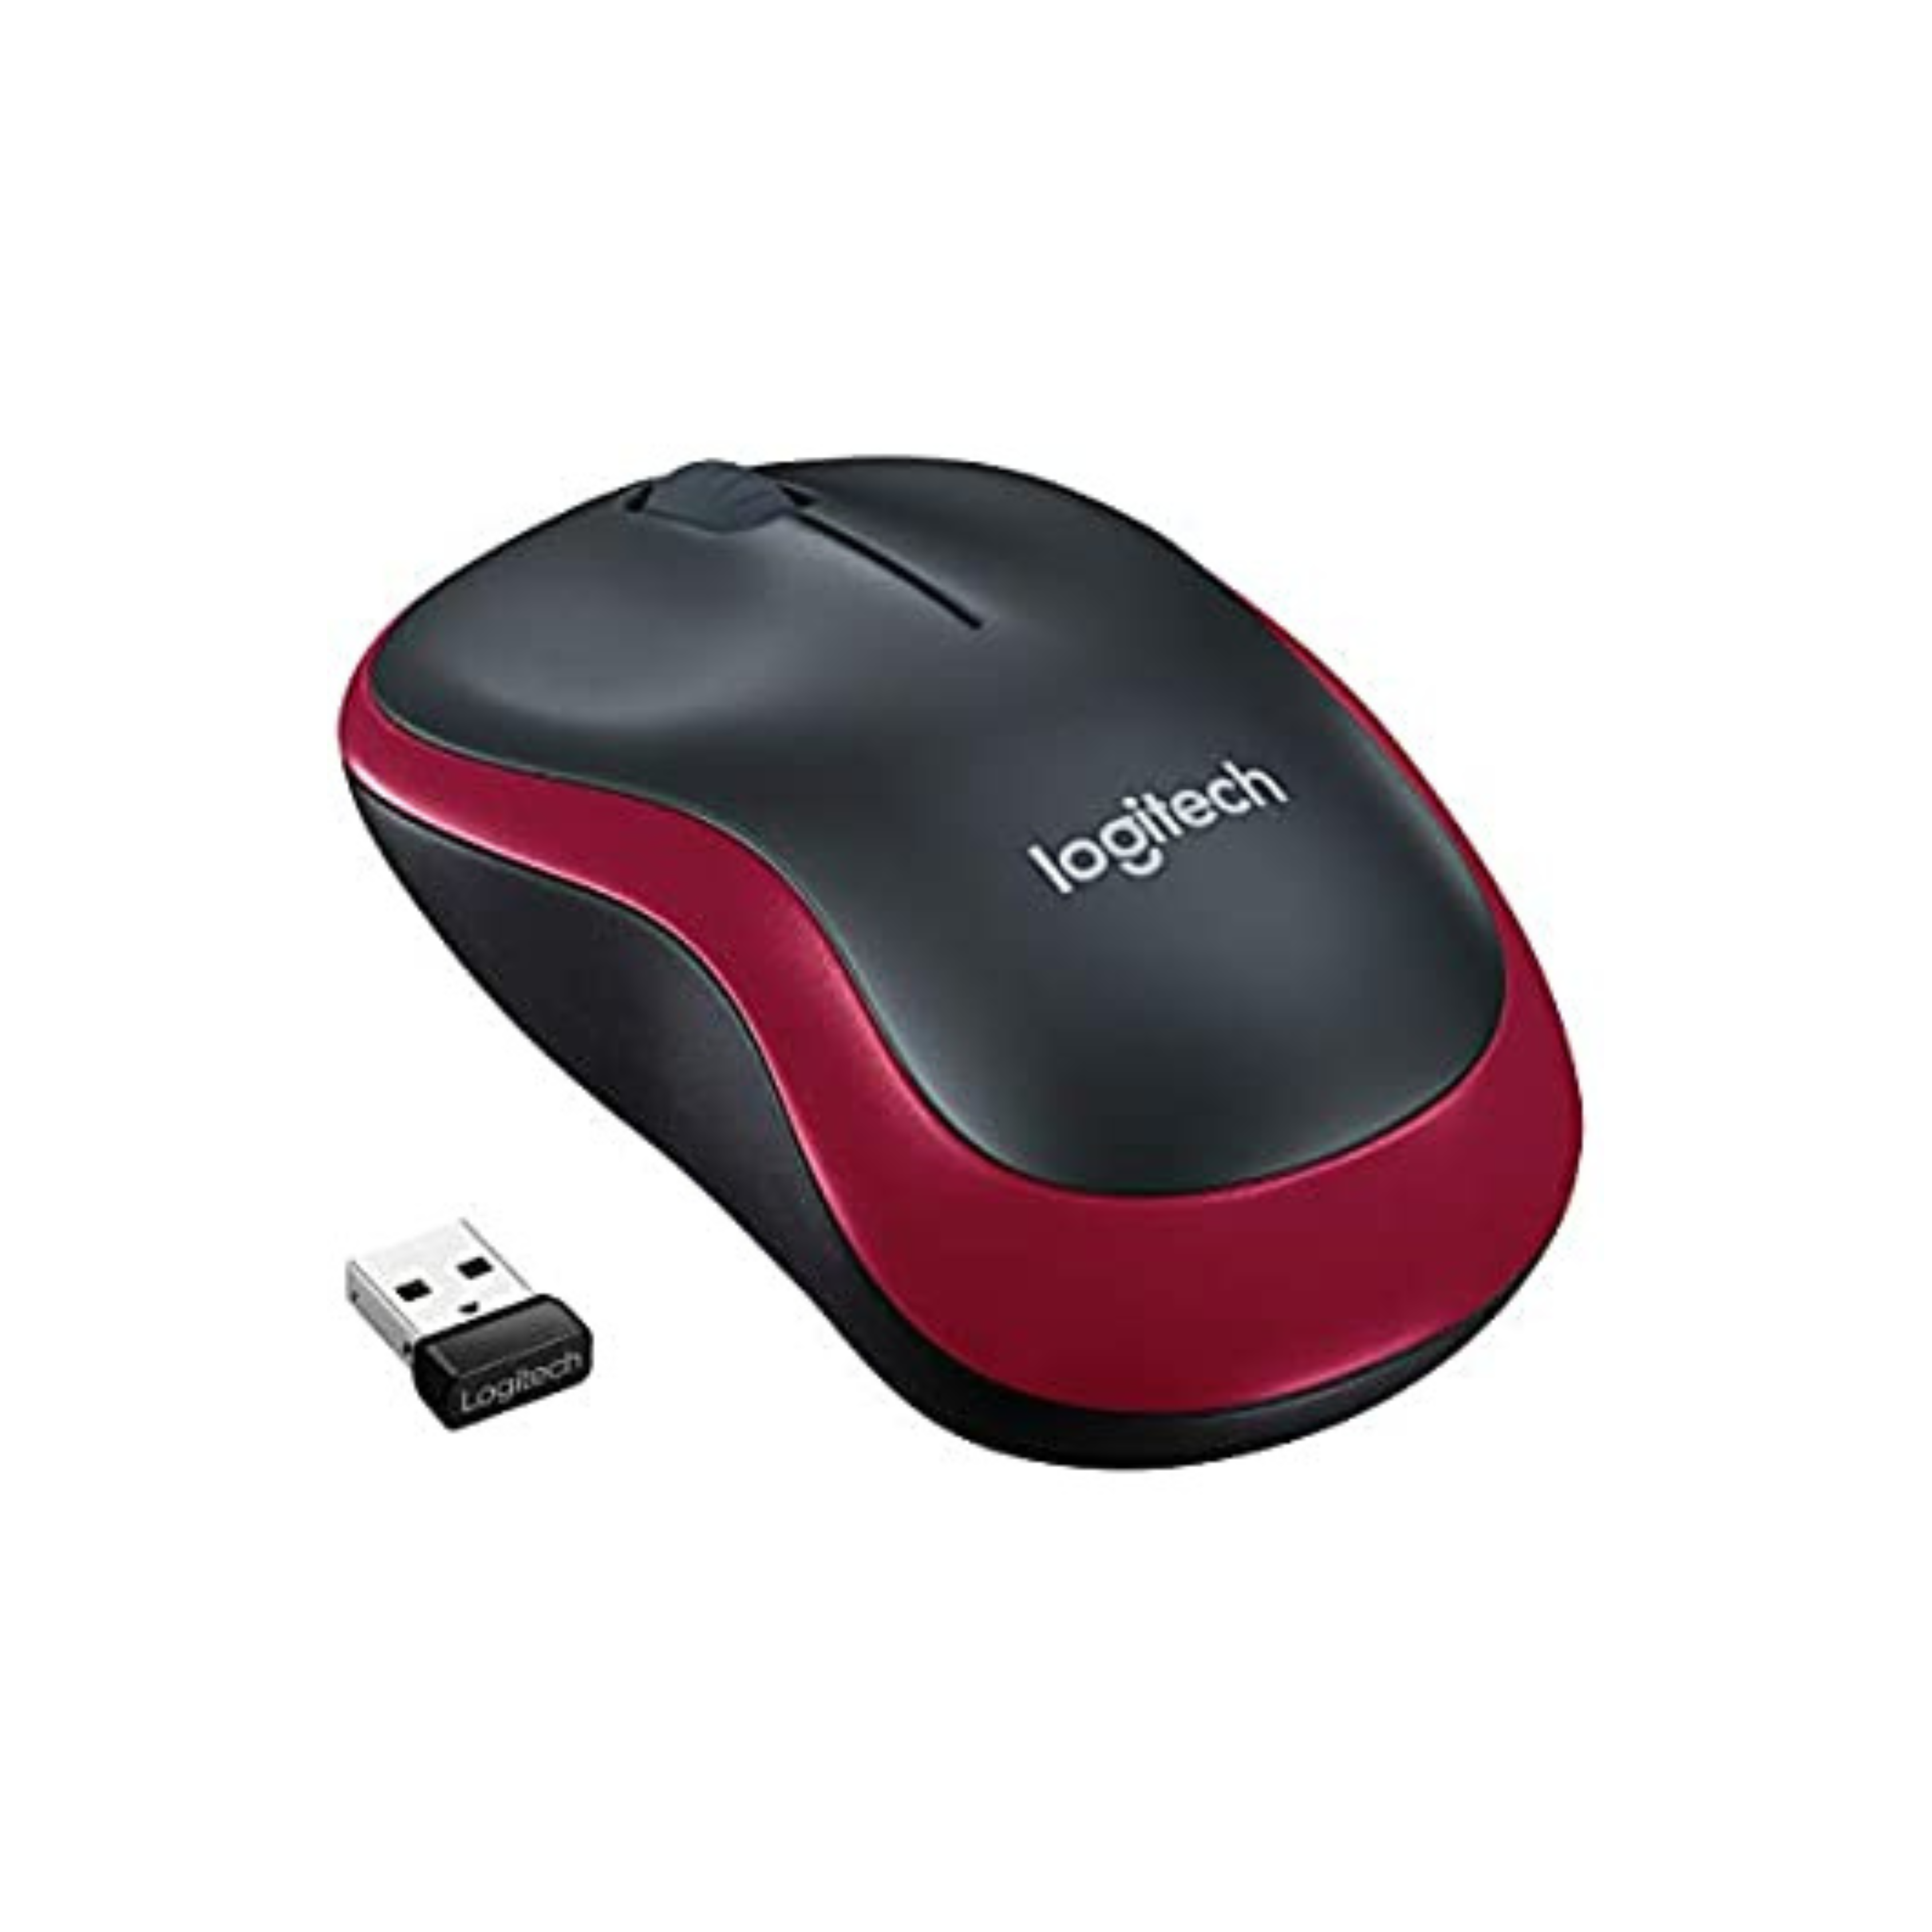 Logitech M185 wireless mouse - Red